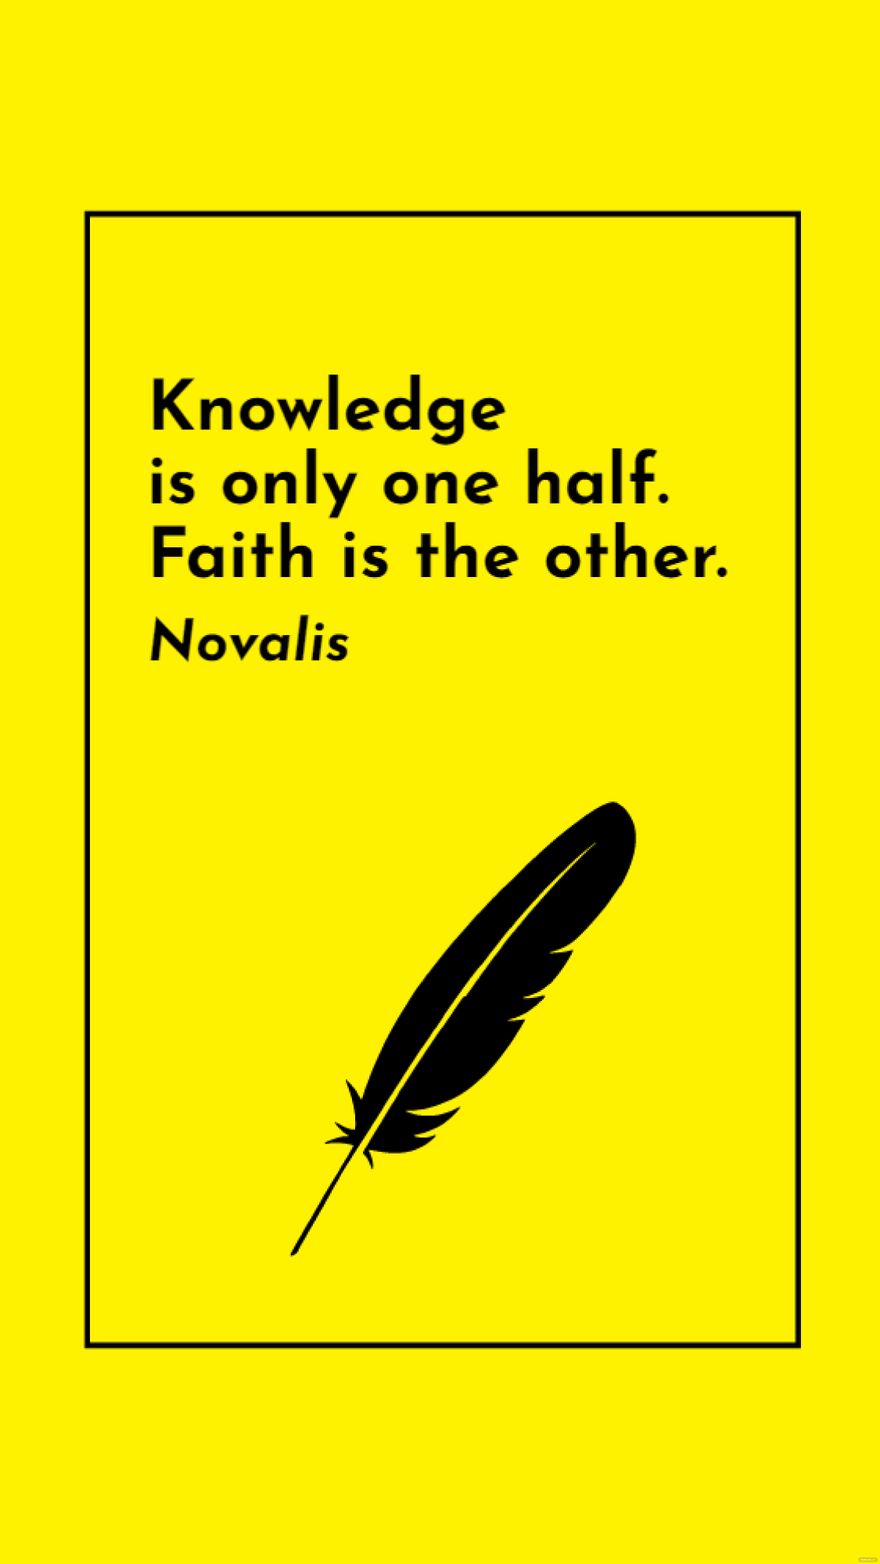 Free Novalis - Knowledge is only one half. Faith is the other. in JPG